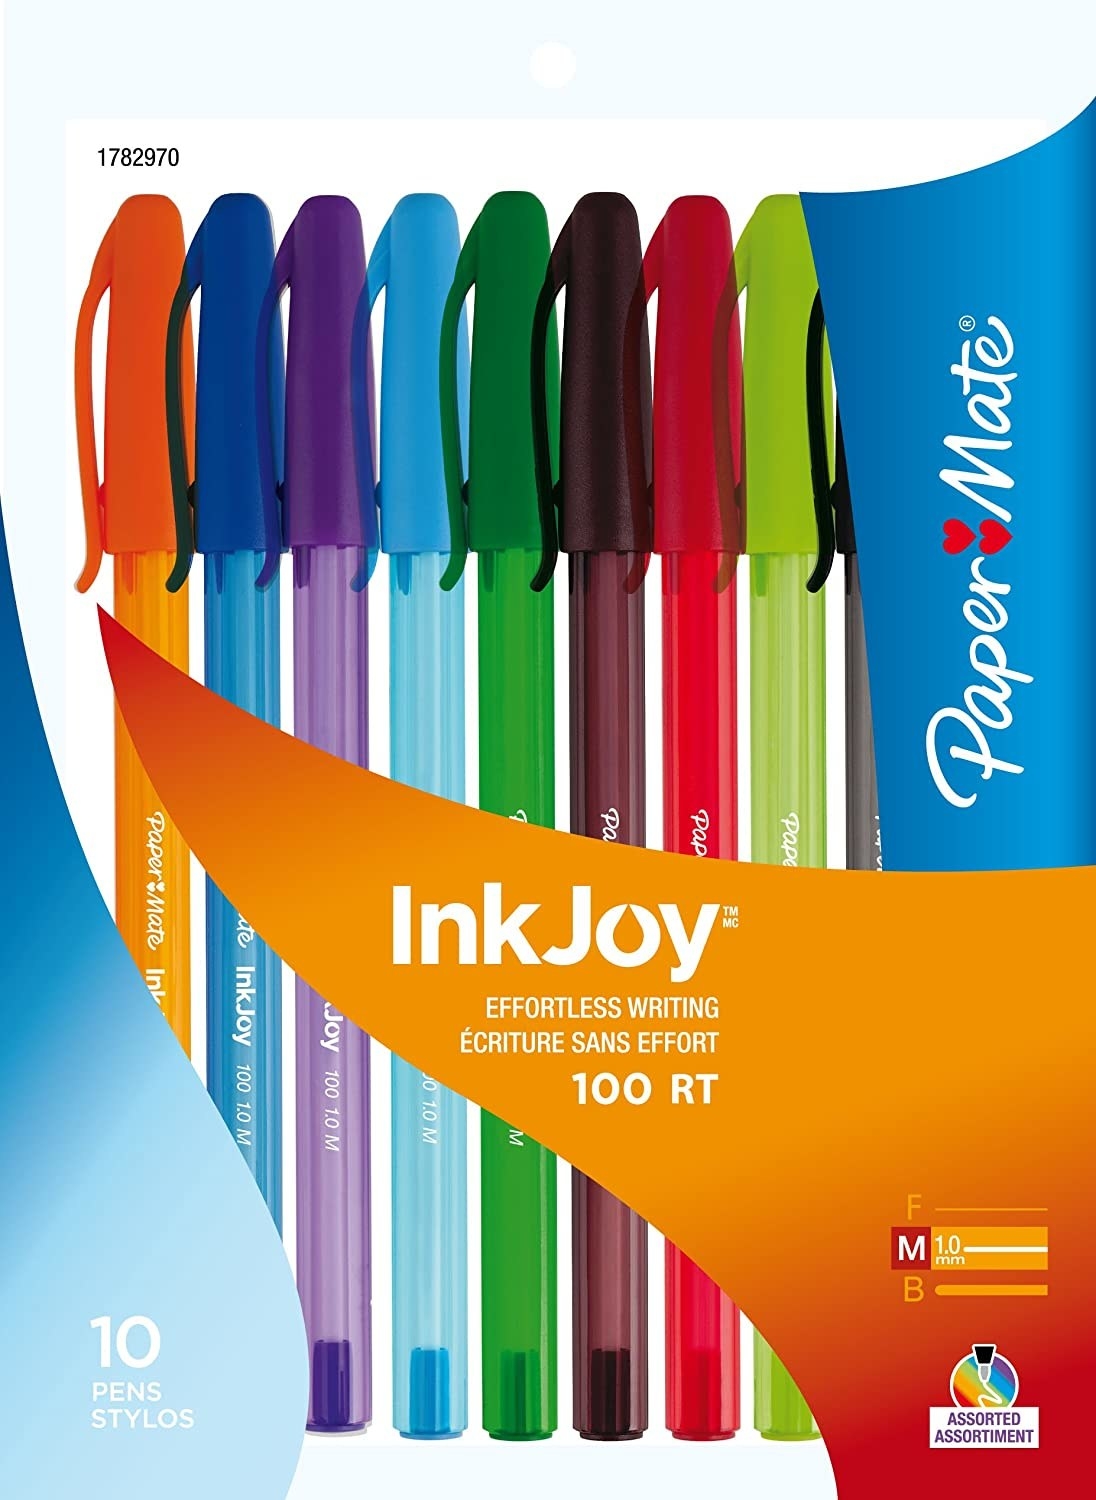 The pack of InkJoy ballpoint pens